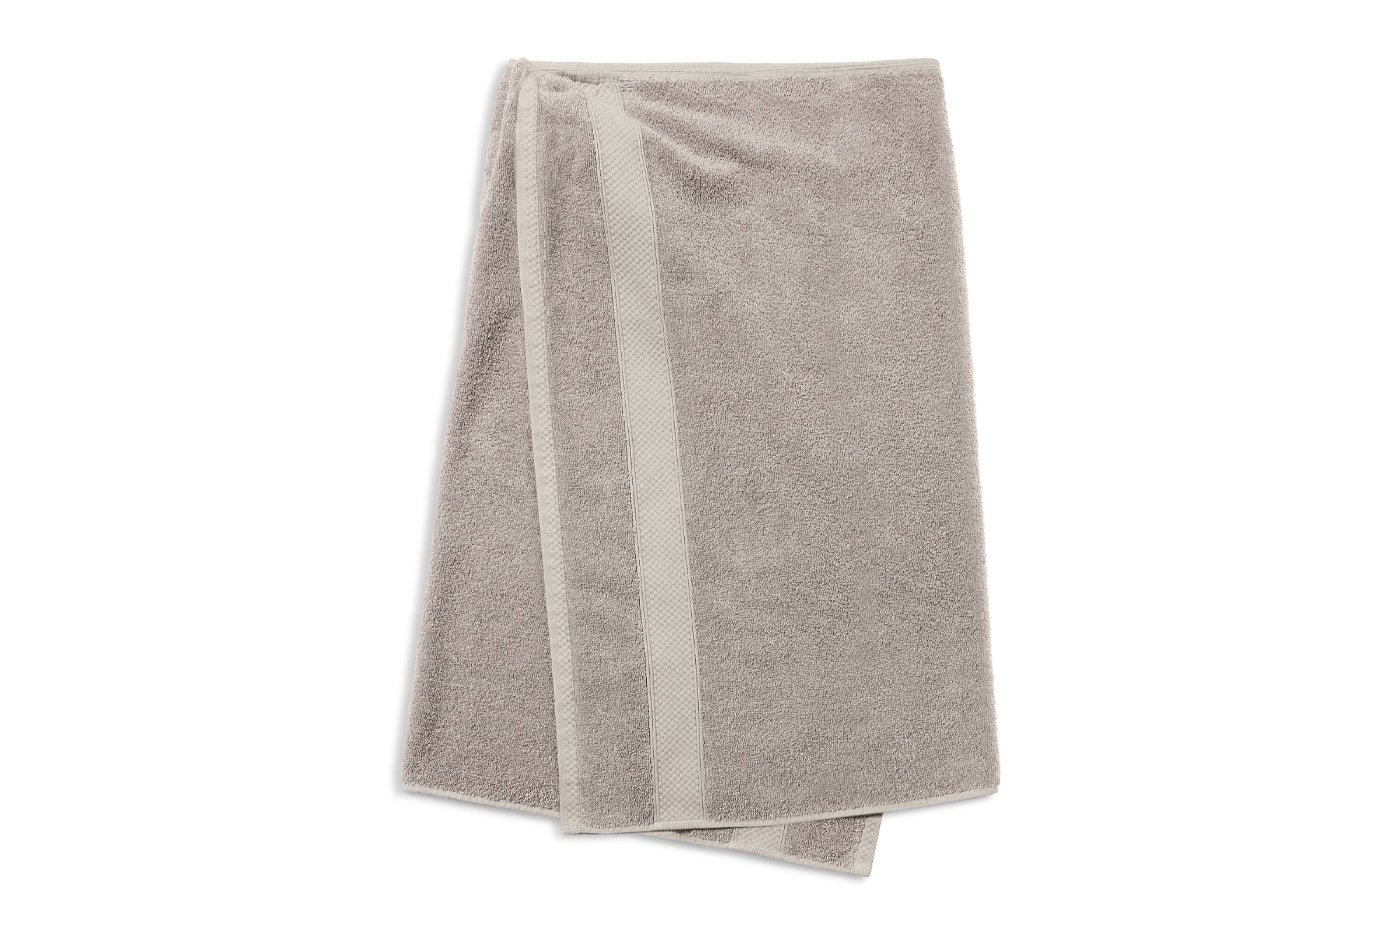 Viral Balenciaga Towel Skirt Is Now Available for Pre-Order shower prices terry cotton unisex adjustable 